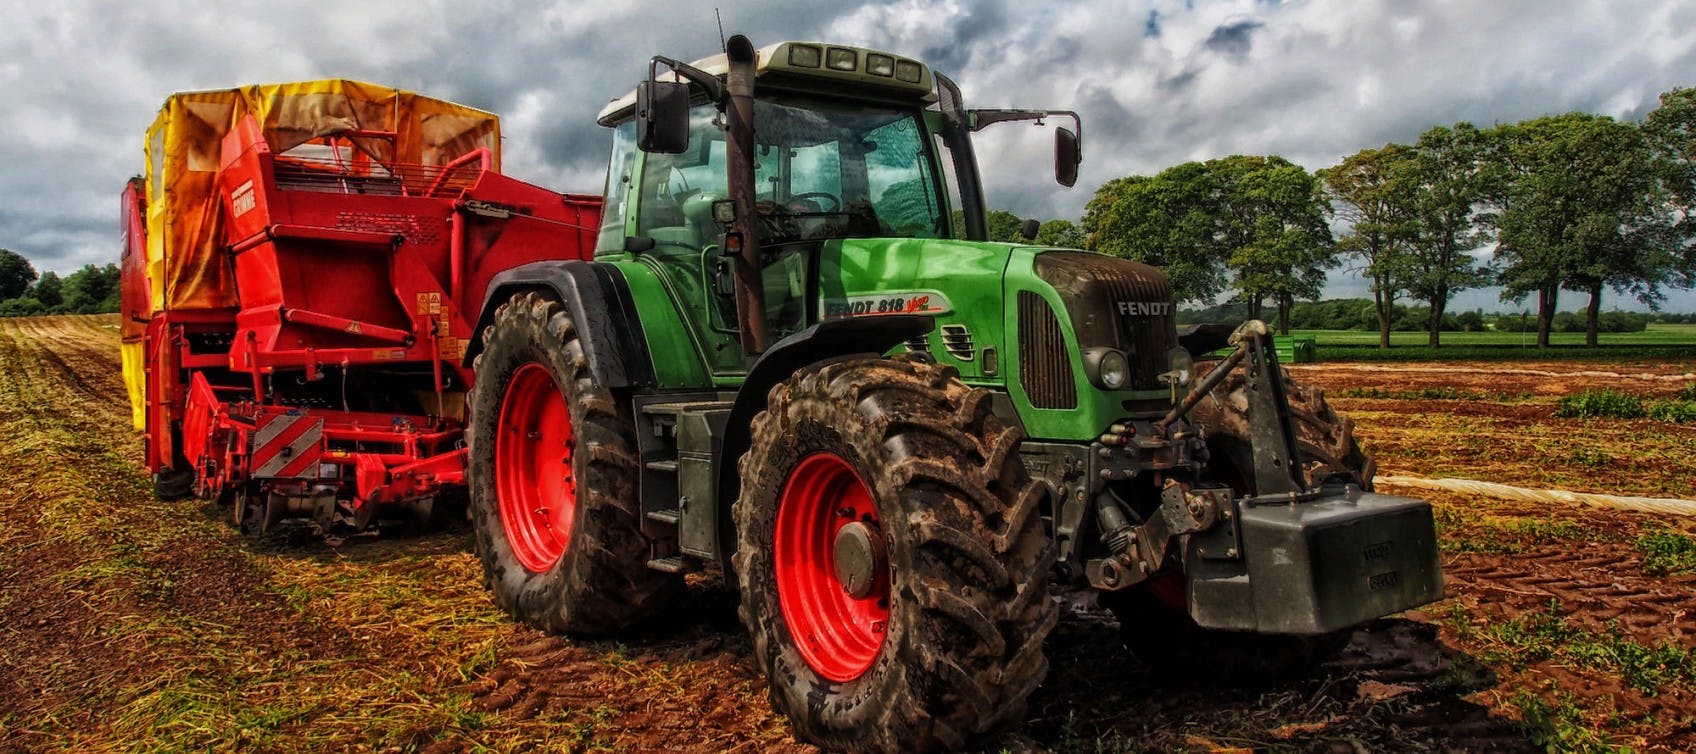 tractor field farm countryside country rural HERO